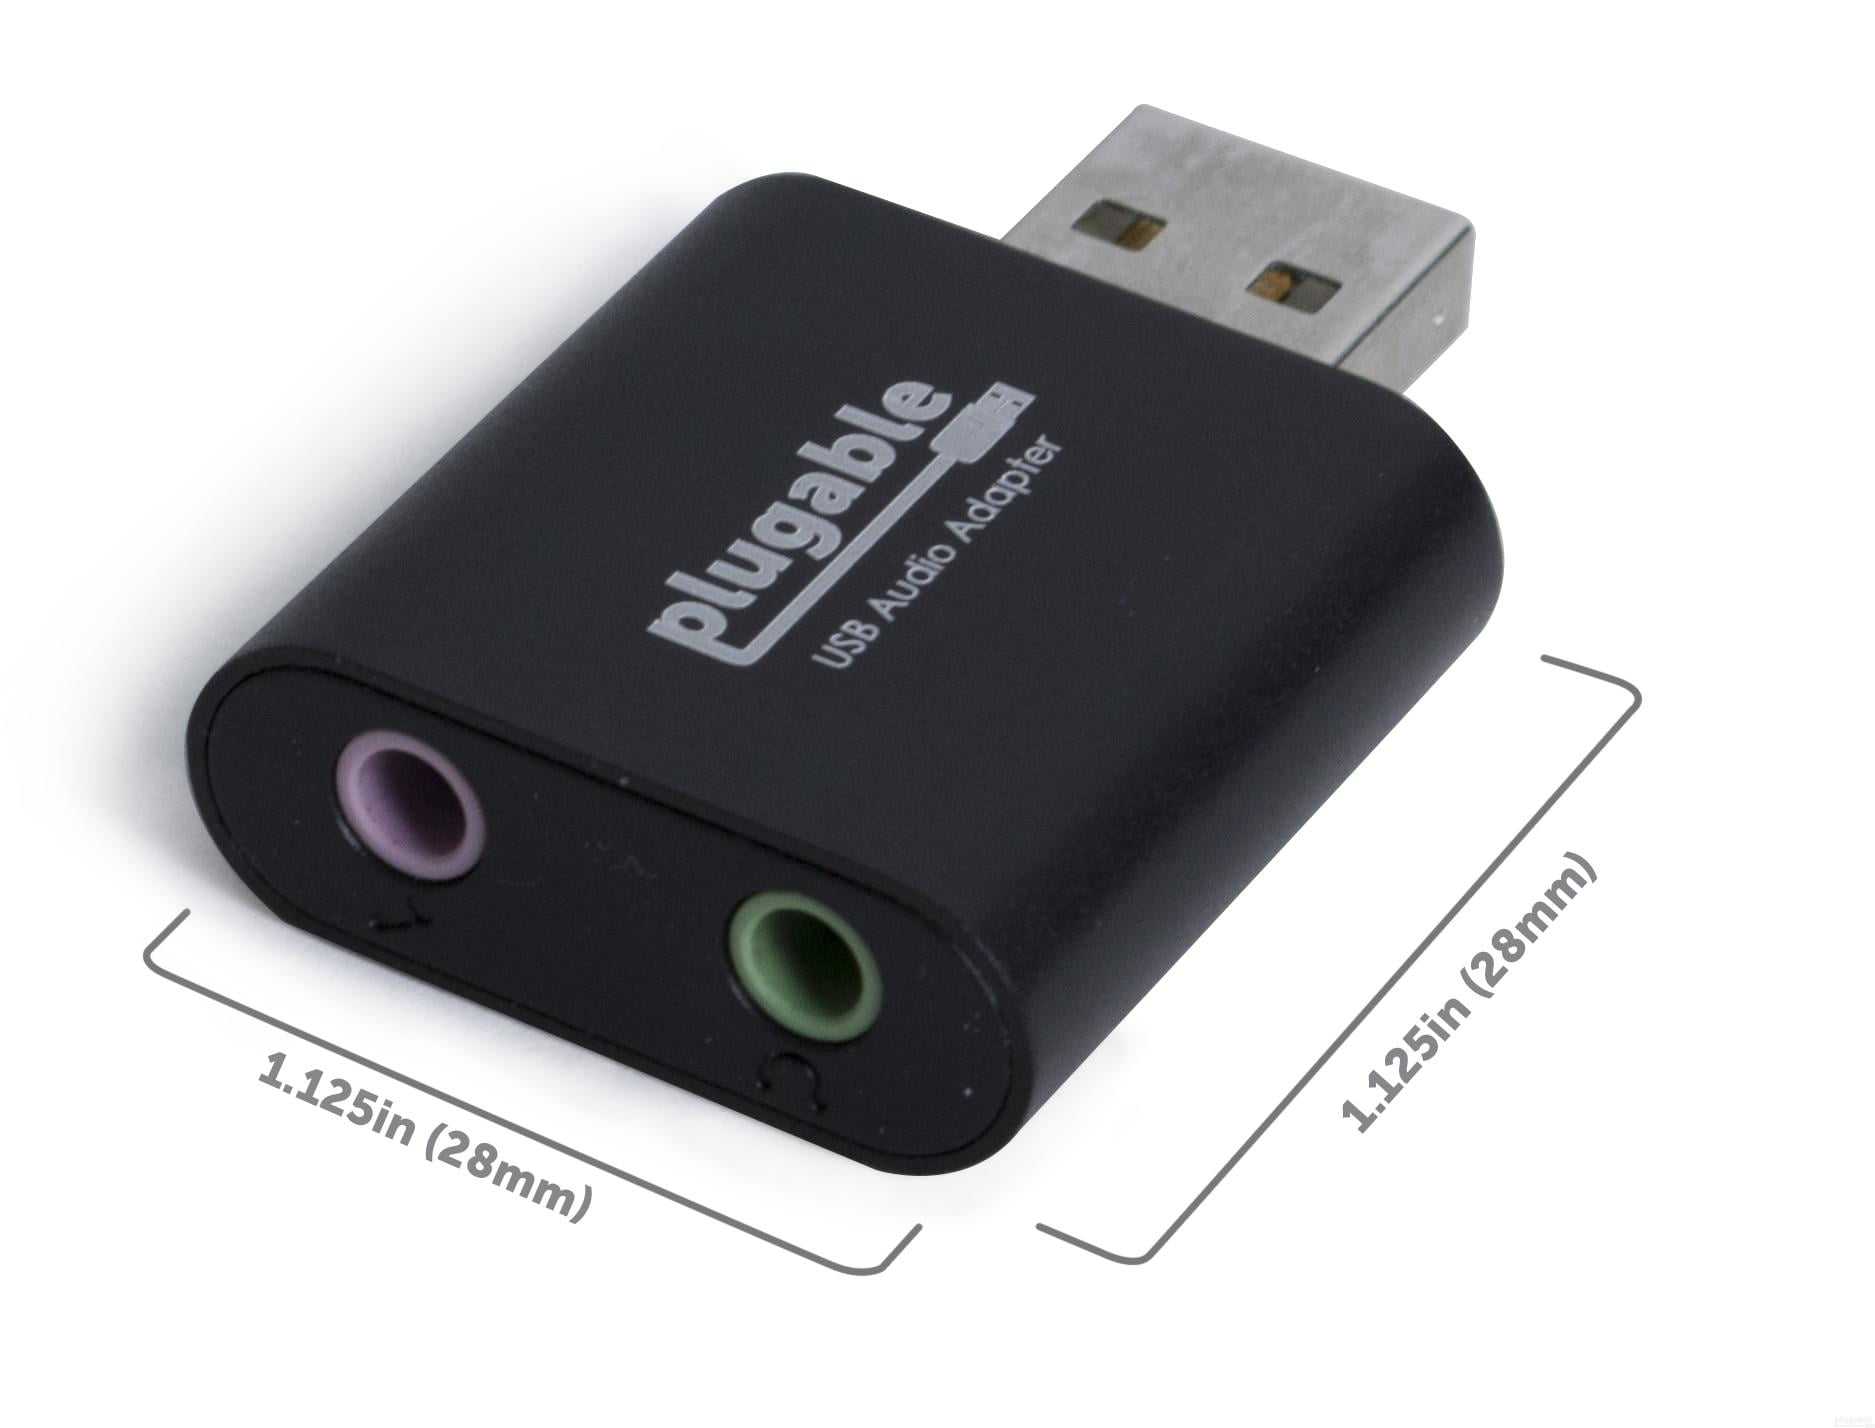 Plugable USB Audio Adapter with Speaker-Headphone Microphone Jack, Add an External Stereo Sound Card Any PC, Compatible with Windows, Mac, Linux - Walmart.com